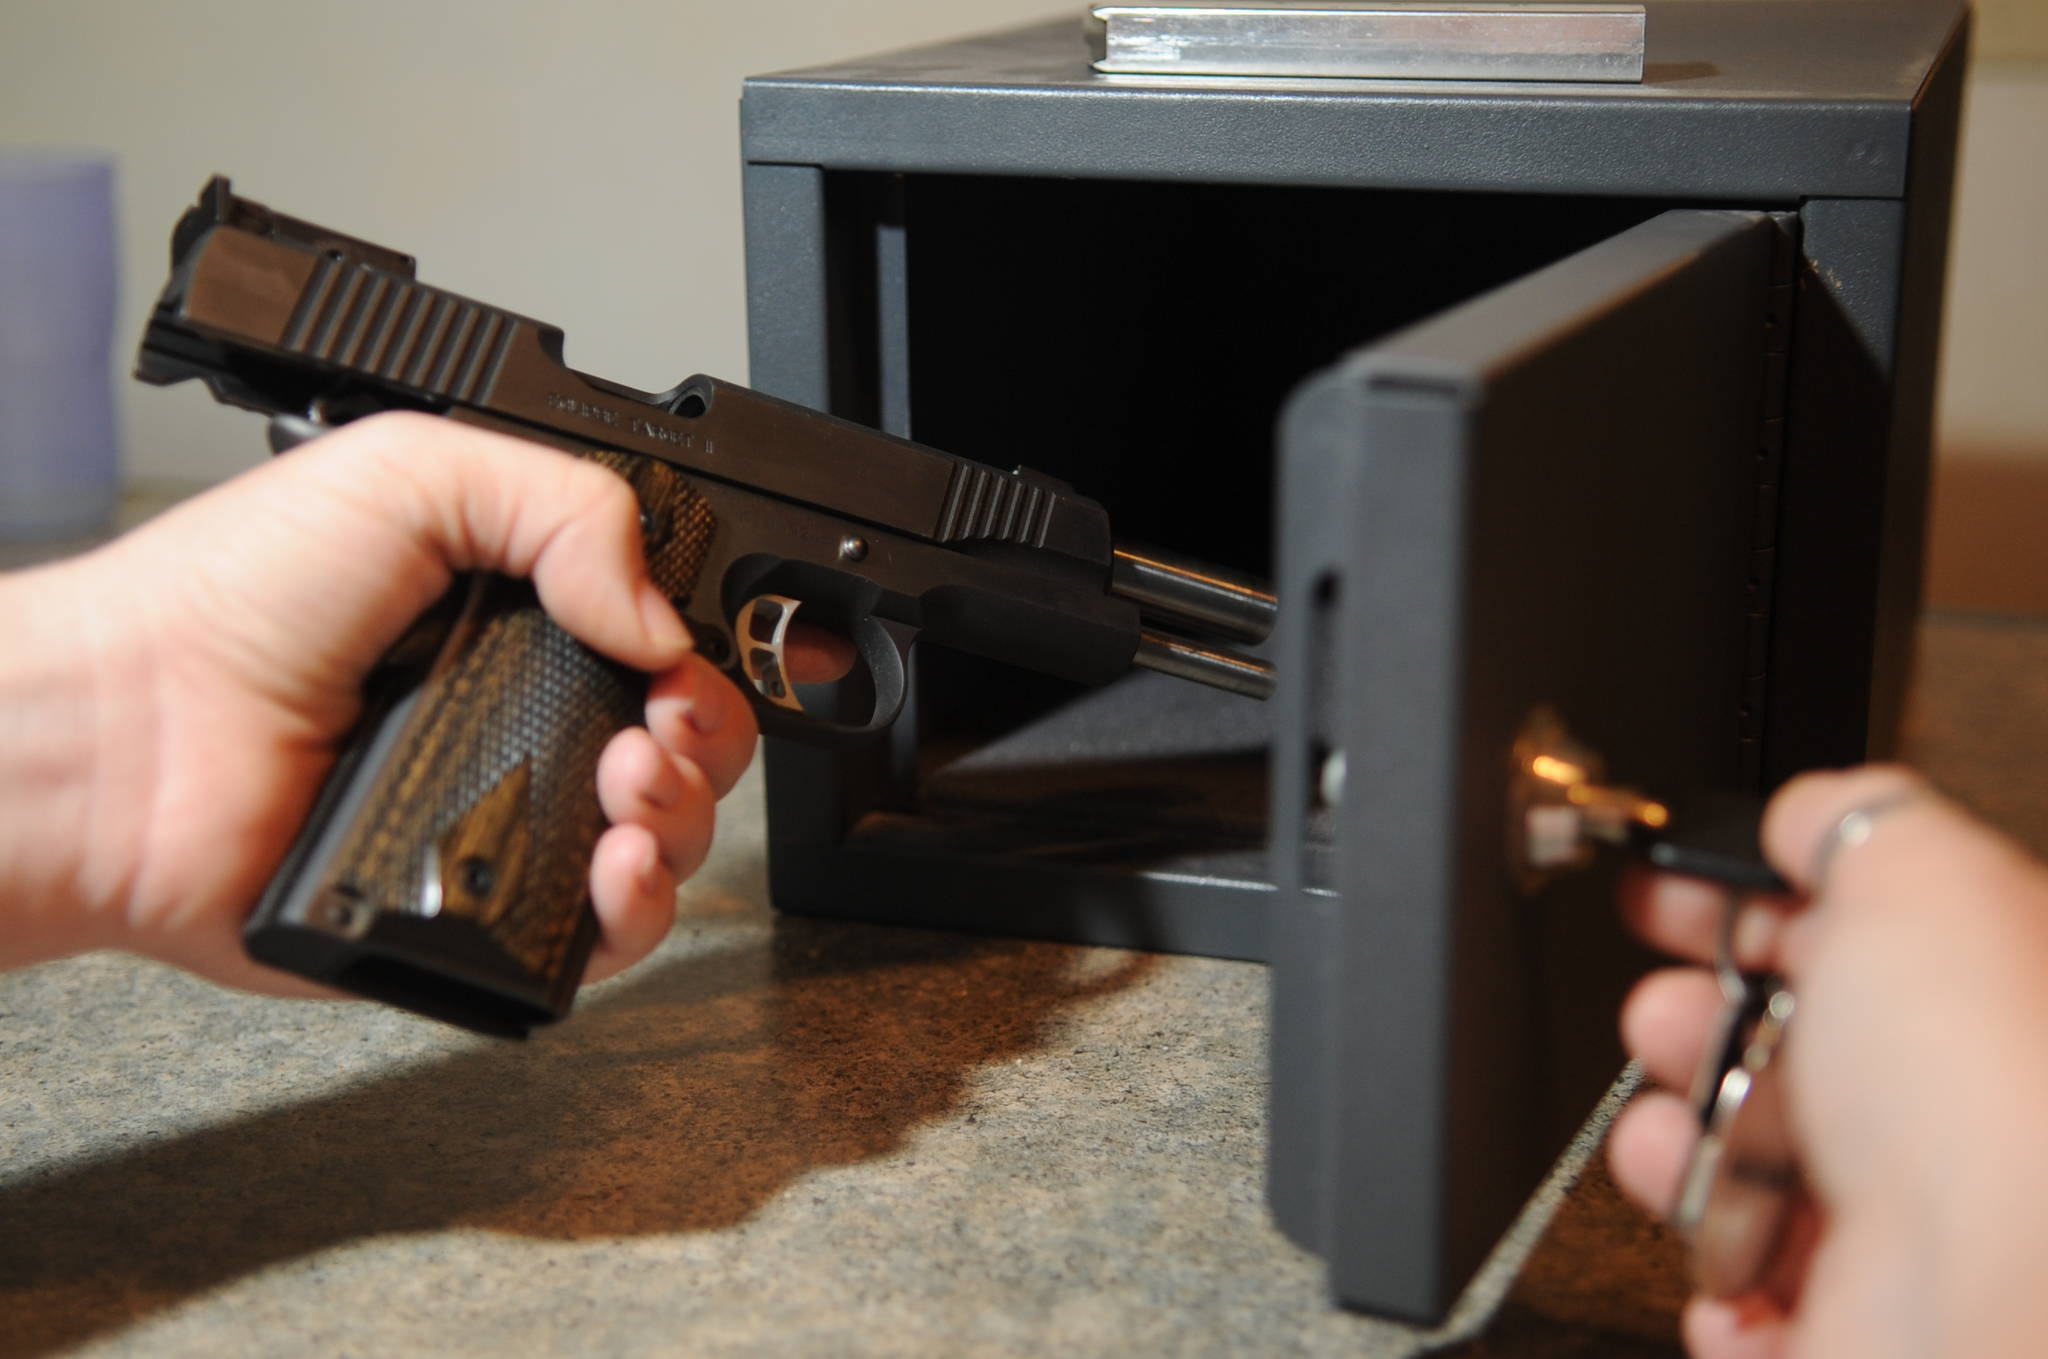 Unloaded firearms should be stored in a lockable gun cabinet, safe or locked vault. (U.S. Air Force Photo/Tech. Sgt. Thomas Dow)